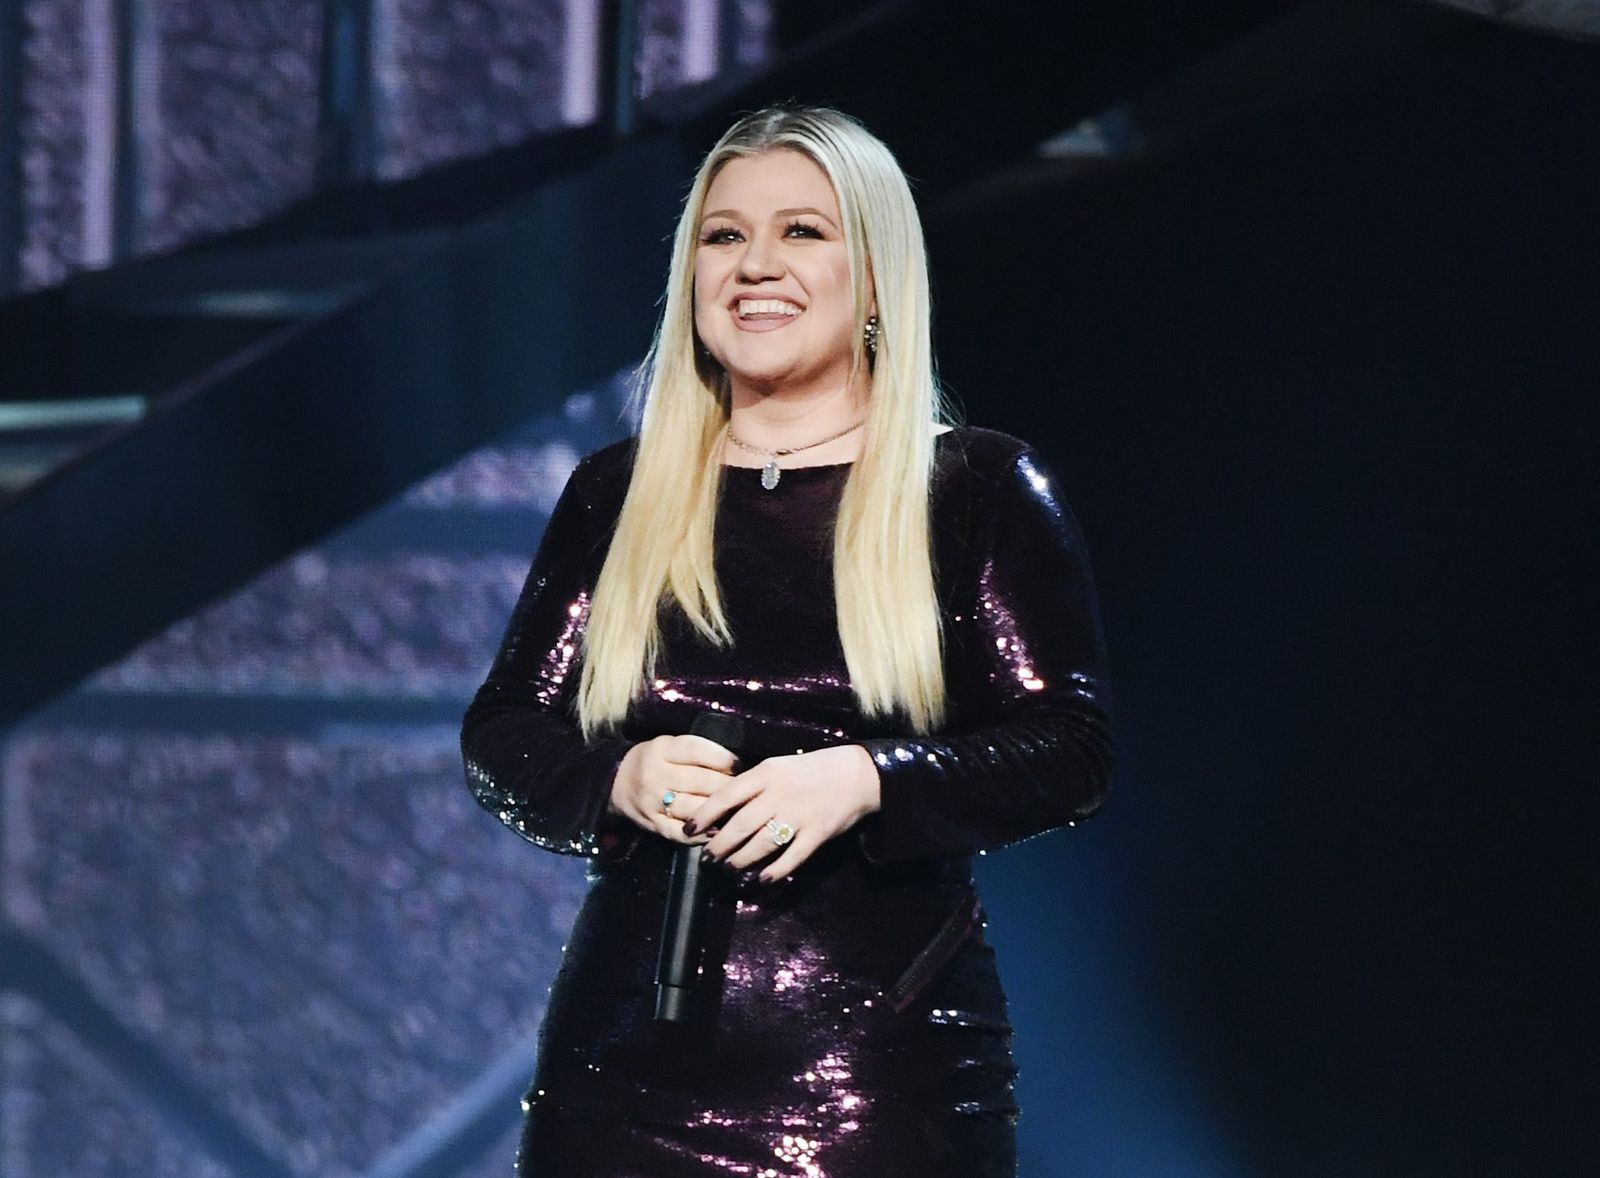 Kelly Clarkson performed onstage during the 53rd Academy of Country Music Awards at MGM Grand Garden Arena on April 15, 2018 in Las Vegas, Nevada | Photo: Getty Images